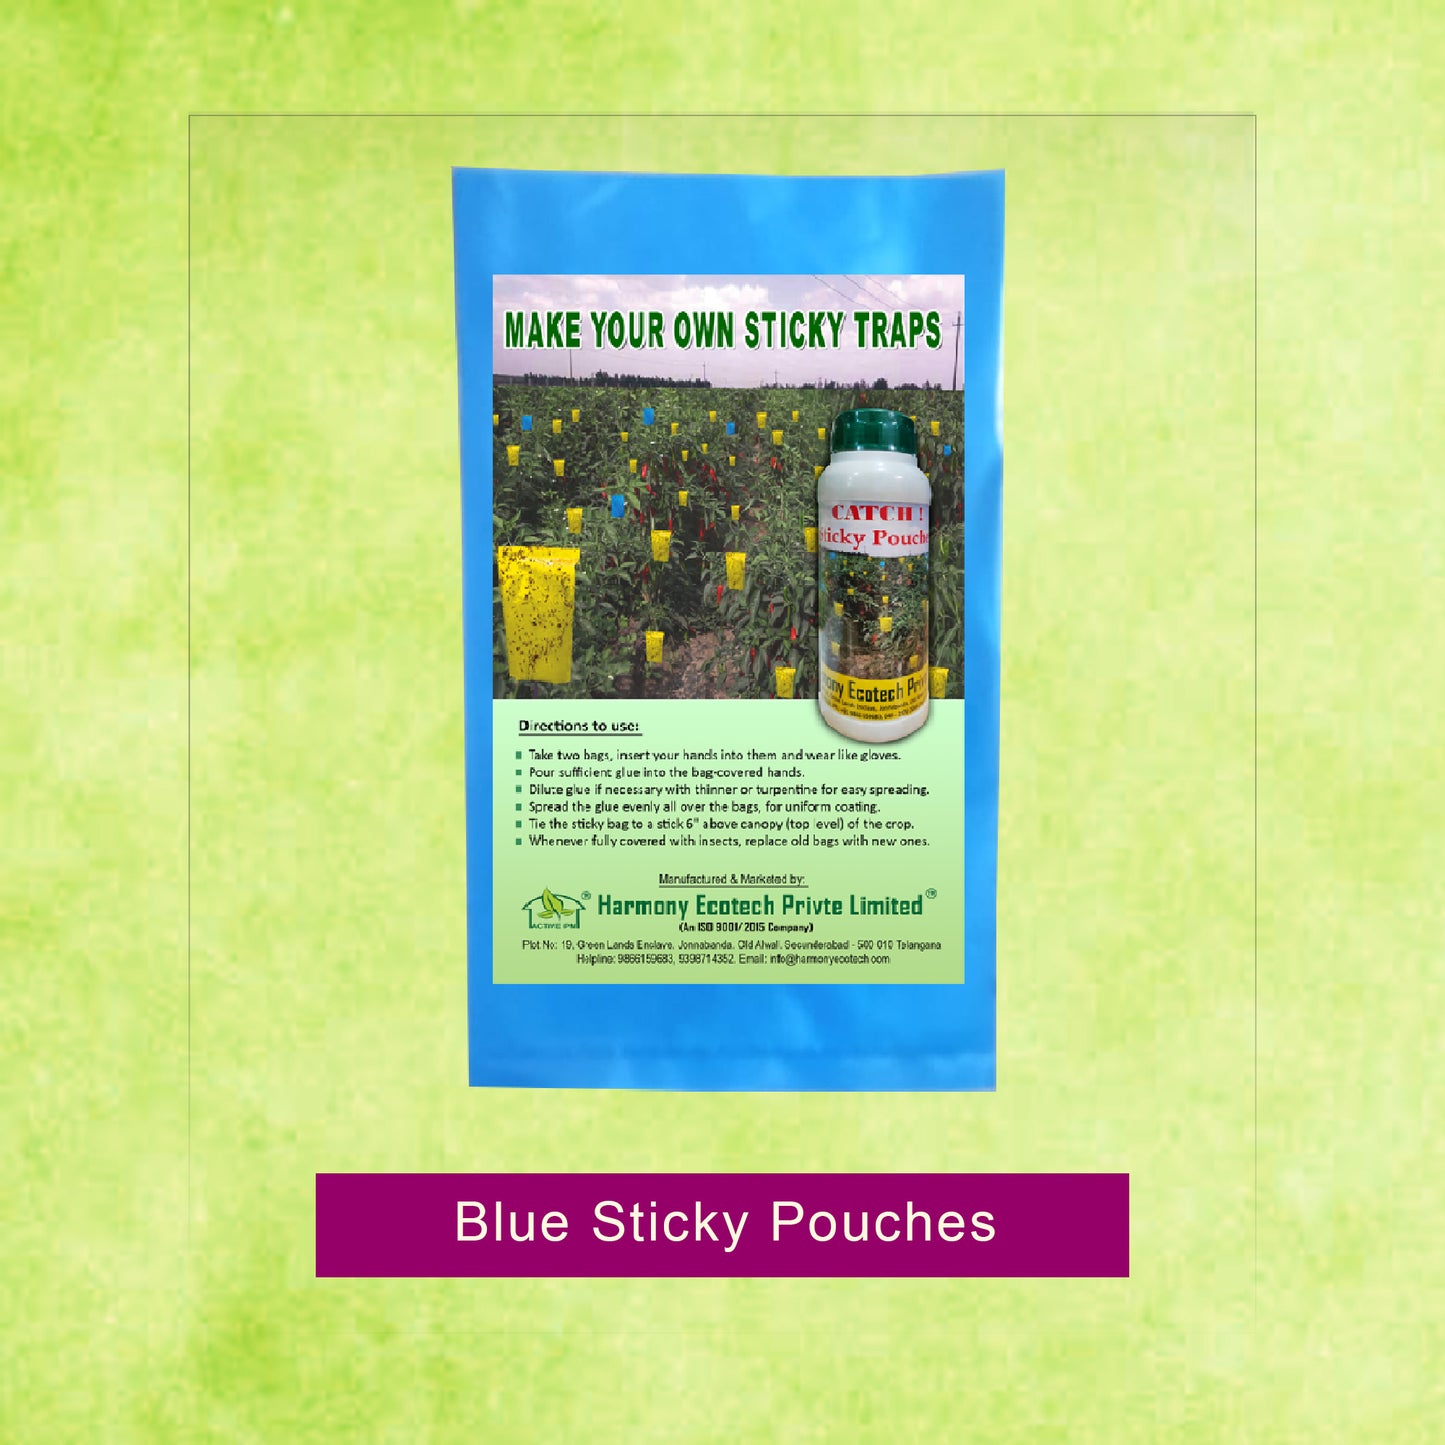 Blue Sticky Pouches